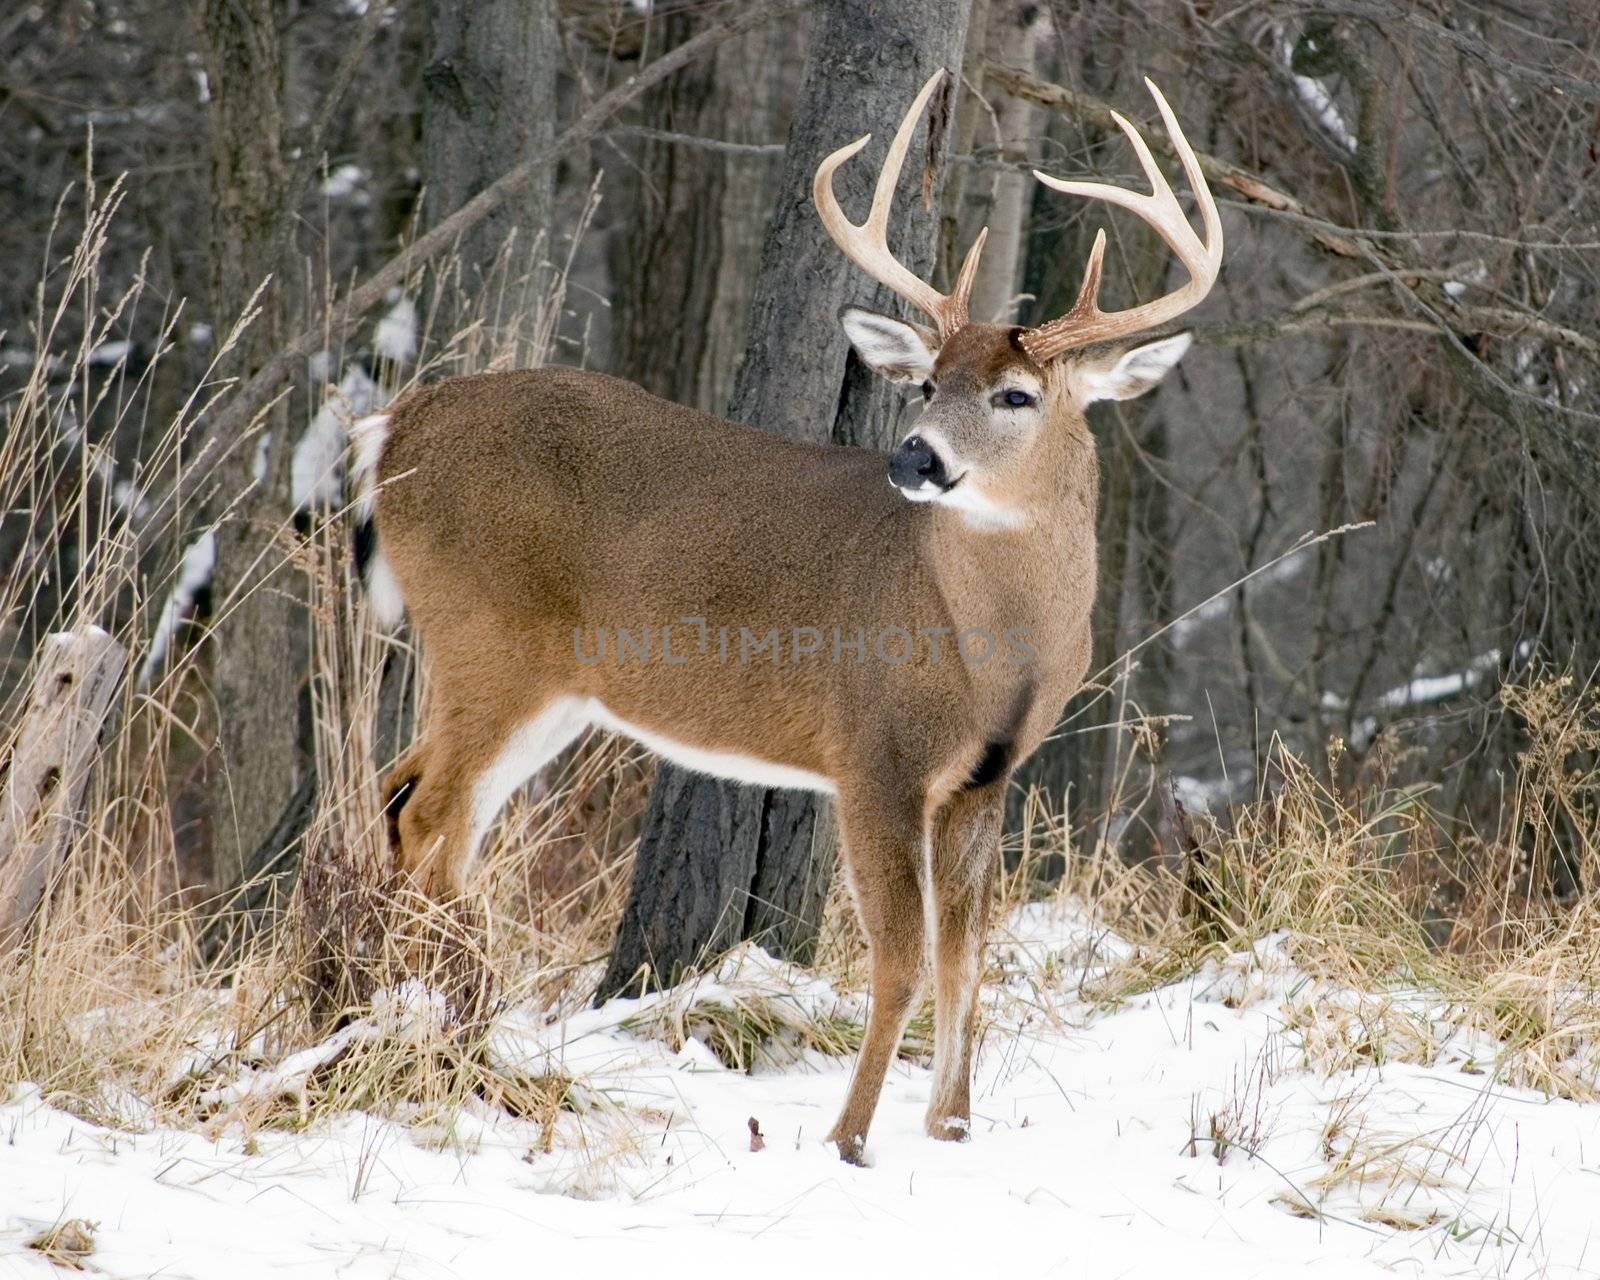 A whitetail deer buck standing in the snow.